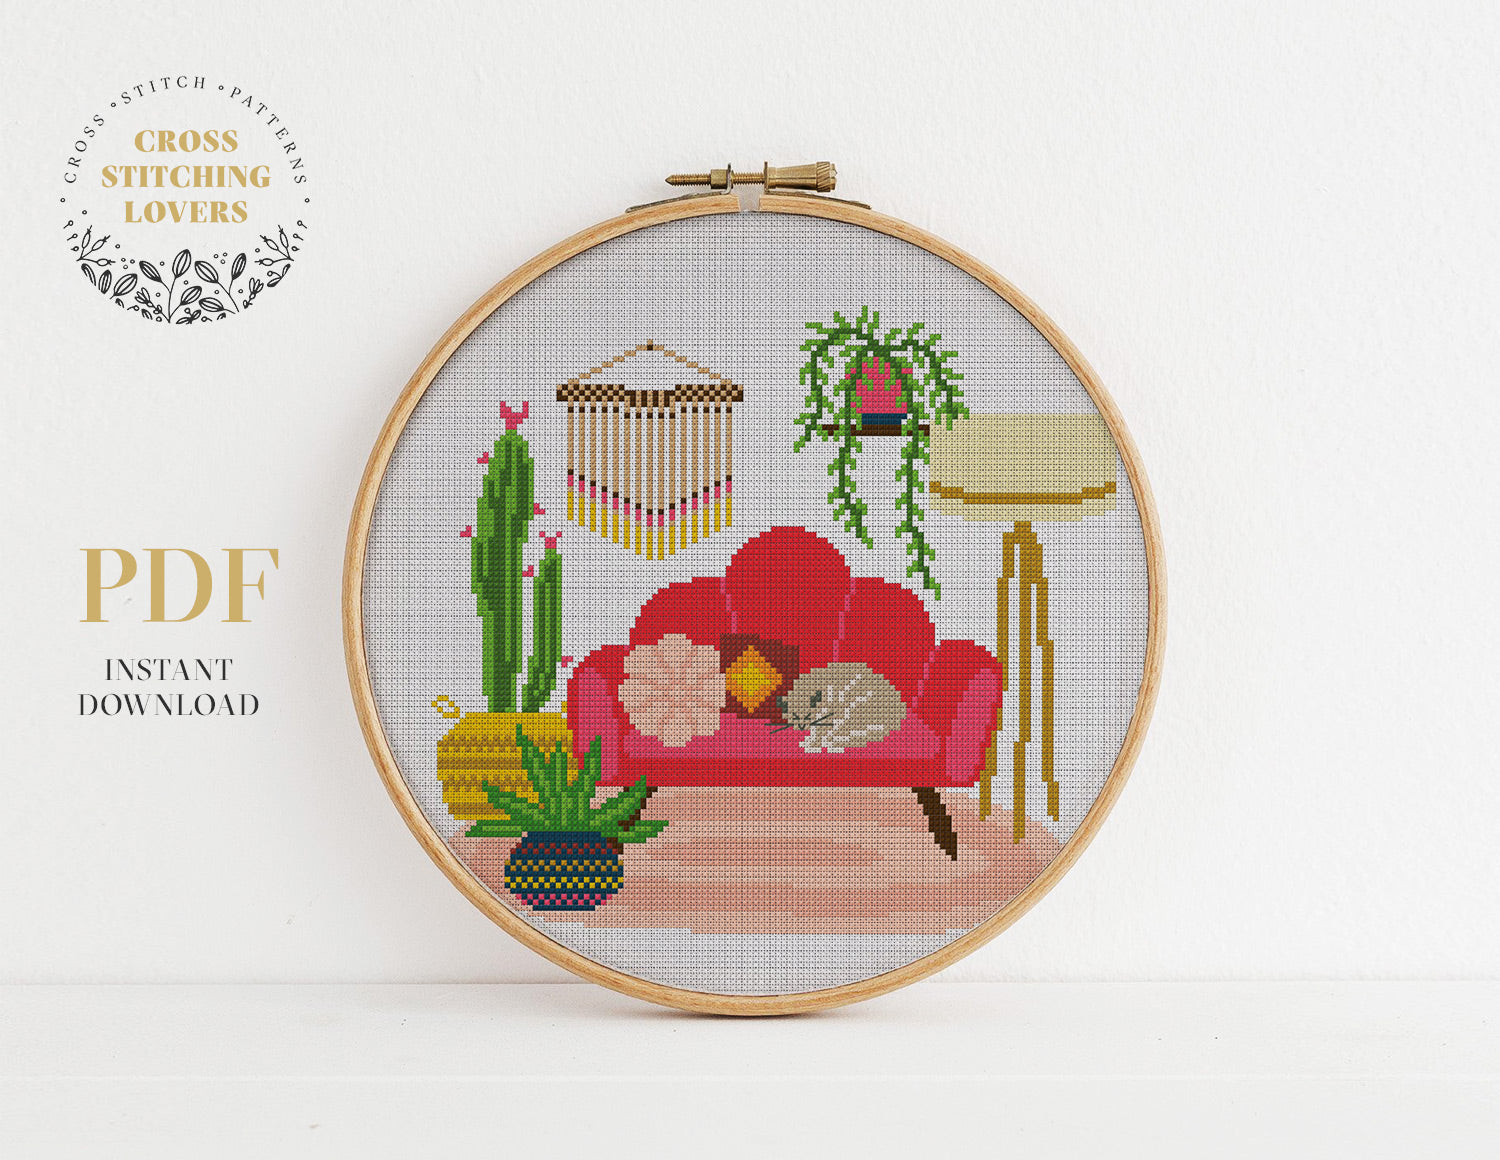 Cute and funny home interior - Cross stitch pattern